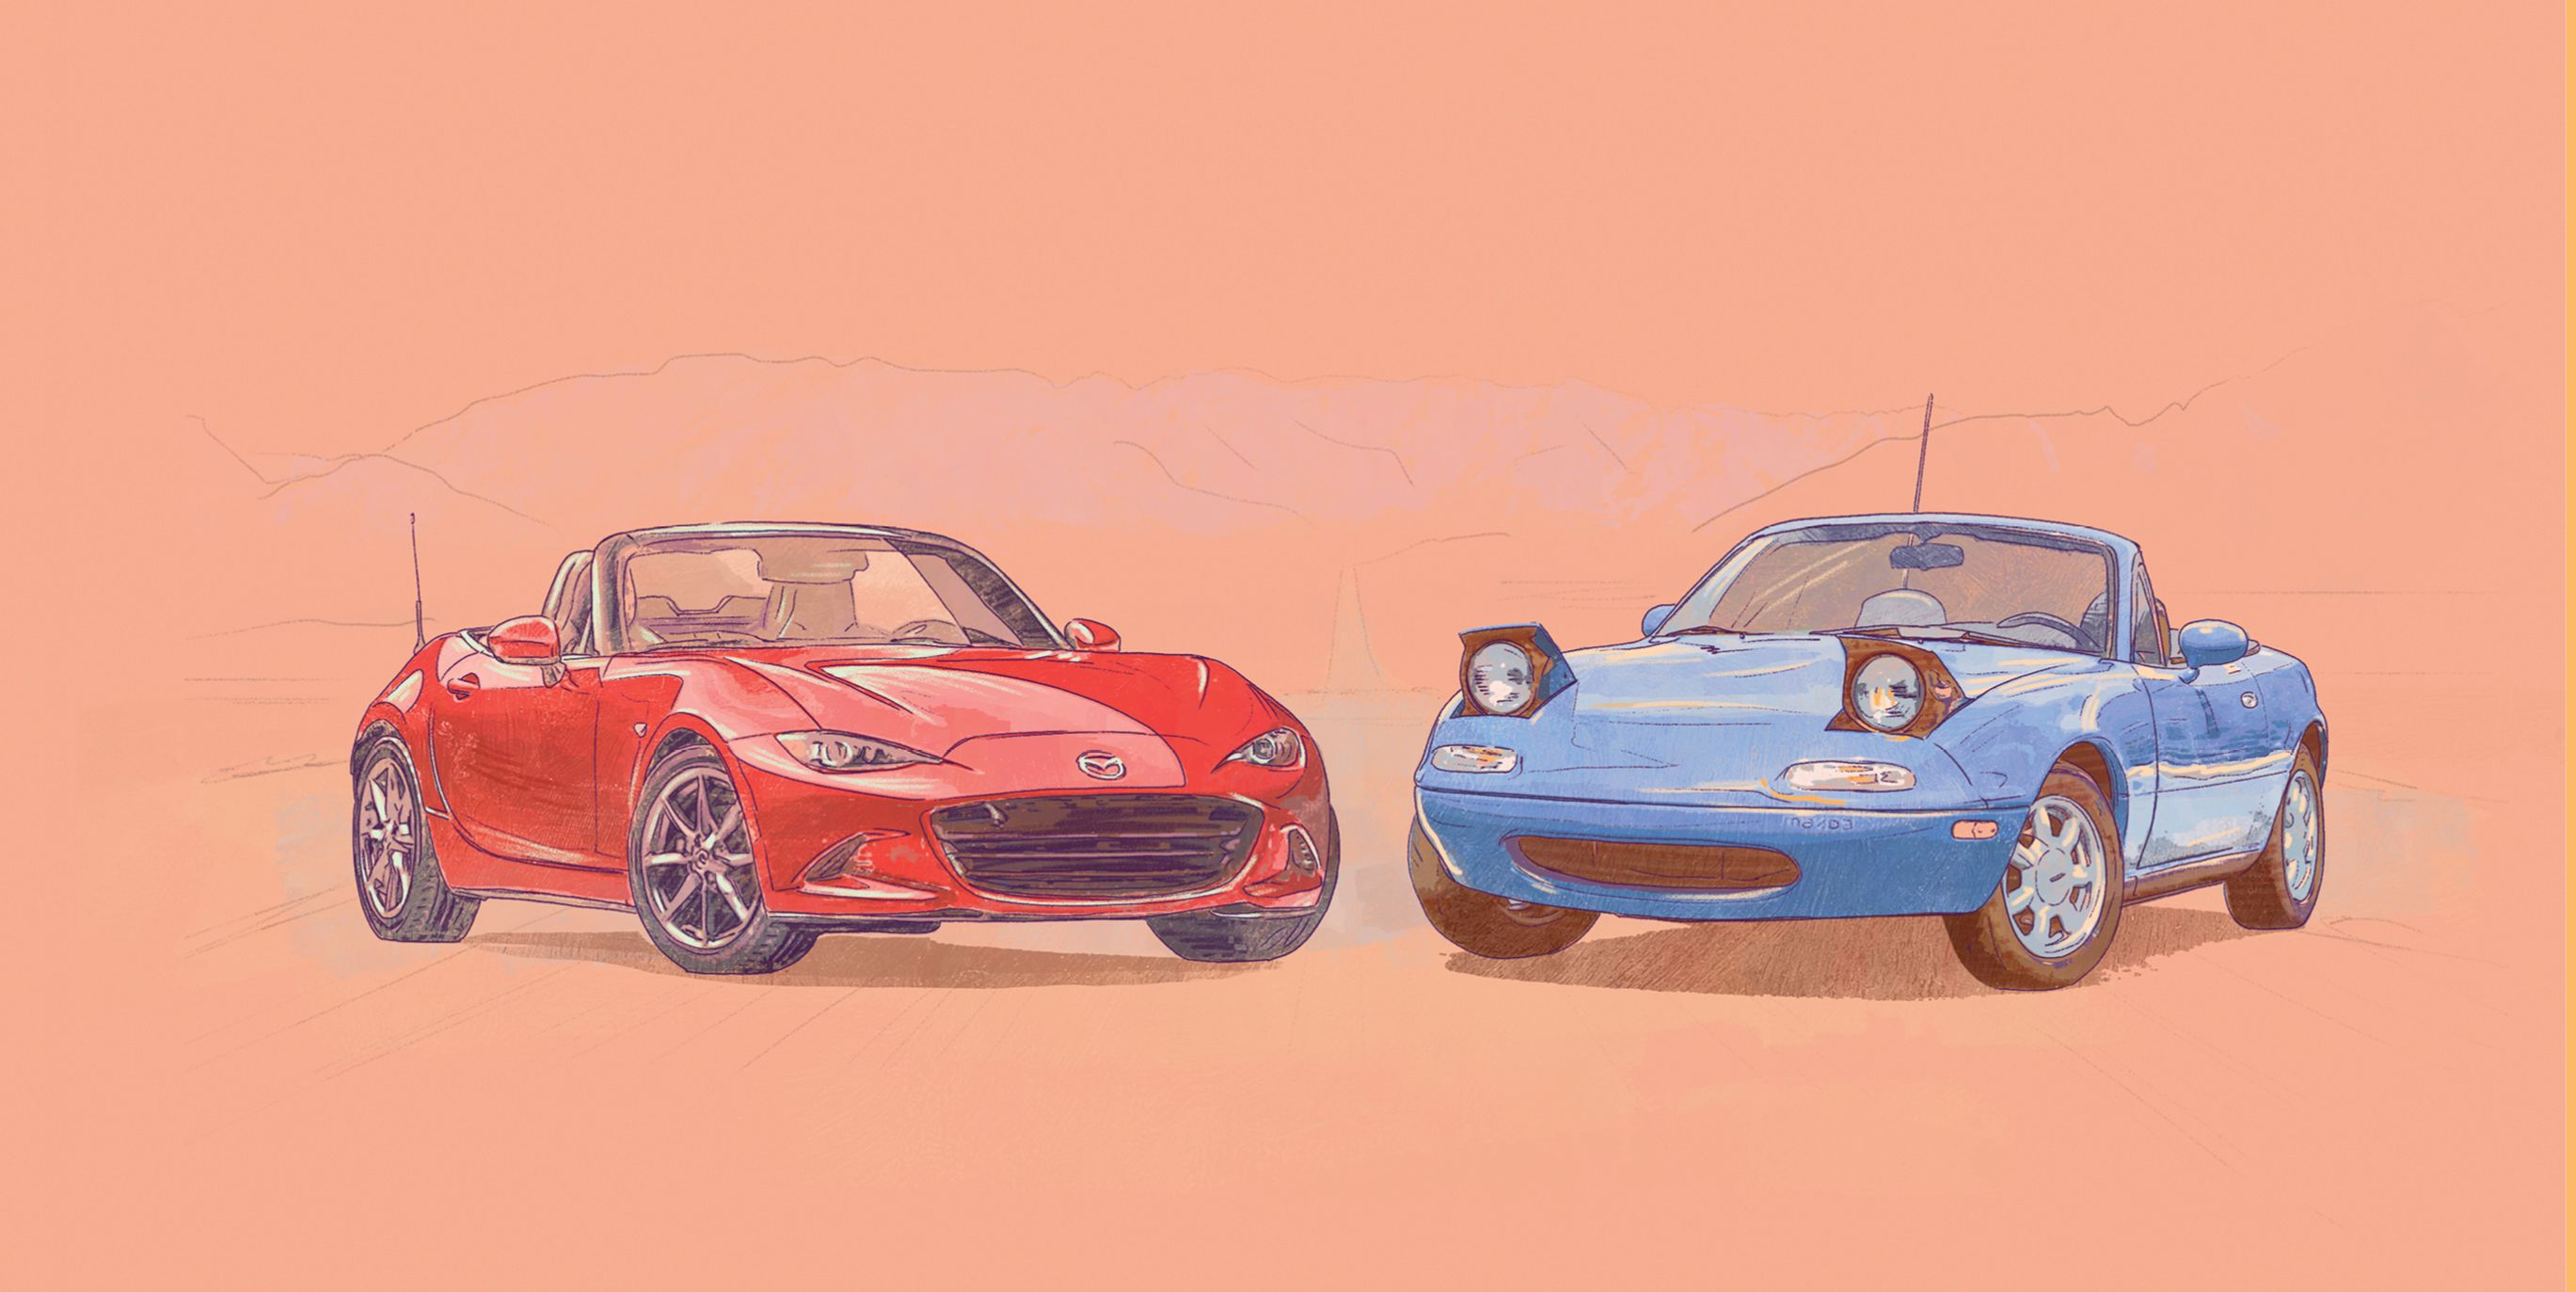 Chasing a Blue Miata, 34 Years and Counting